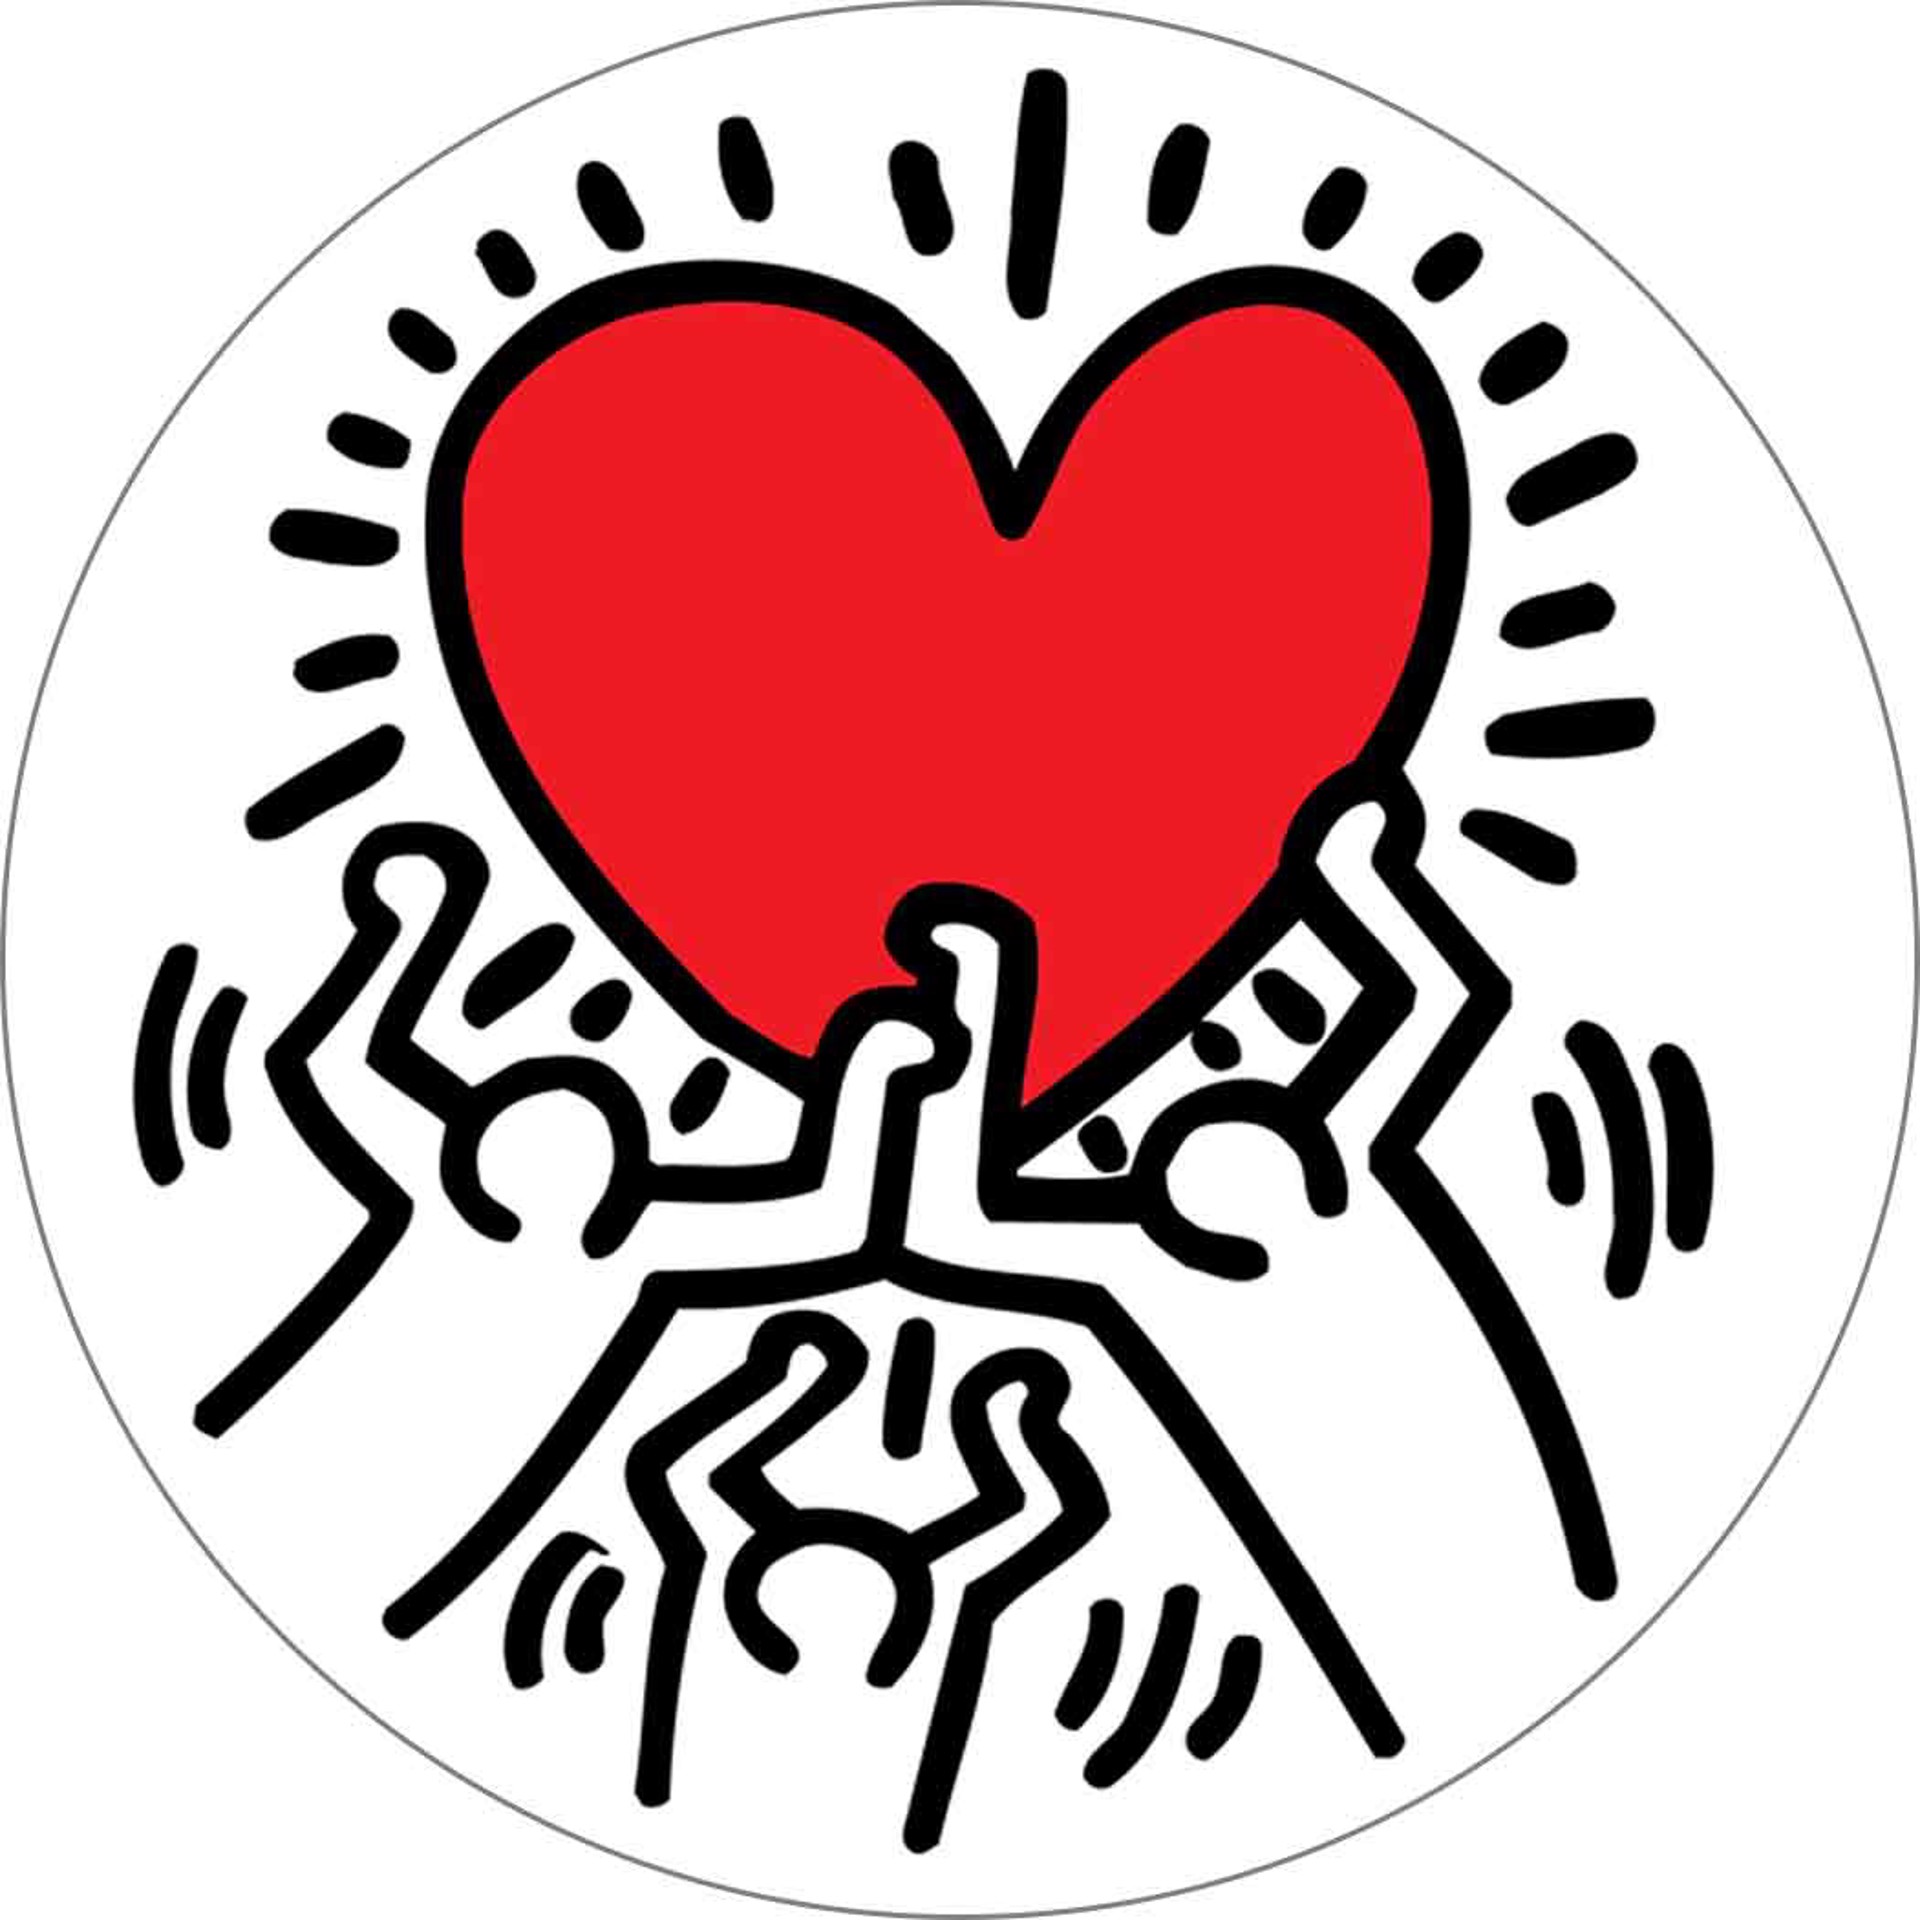 Figures Holding a Heart 2.25 Round Magnet by Keith Haring